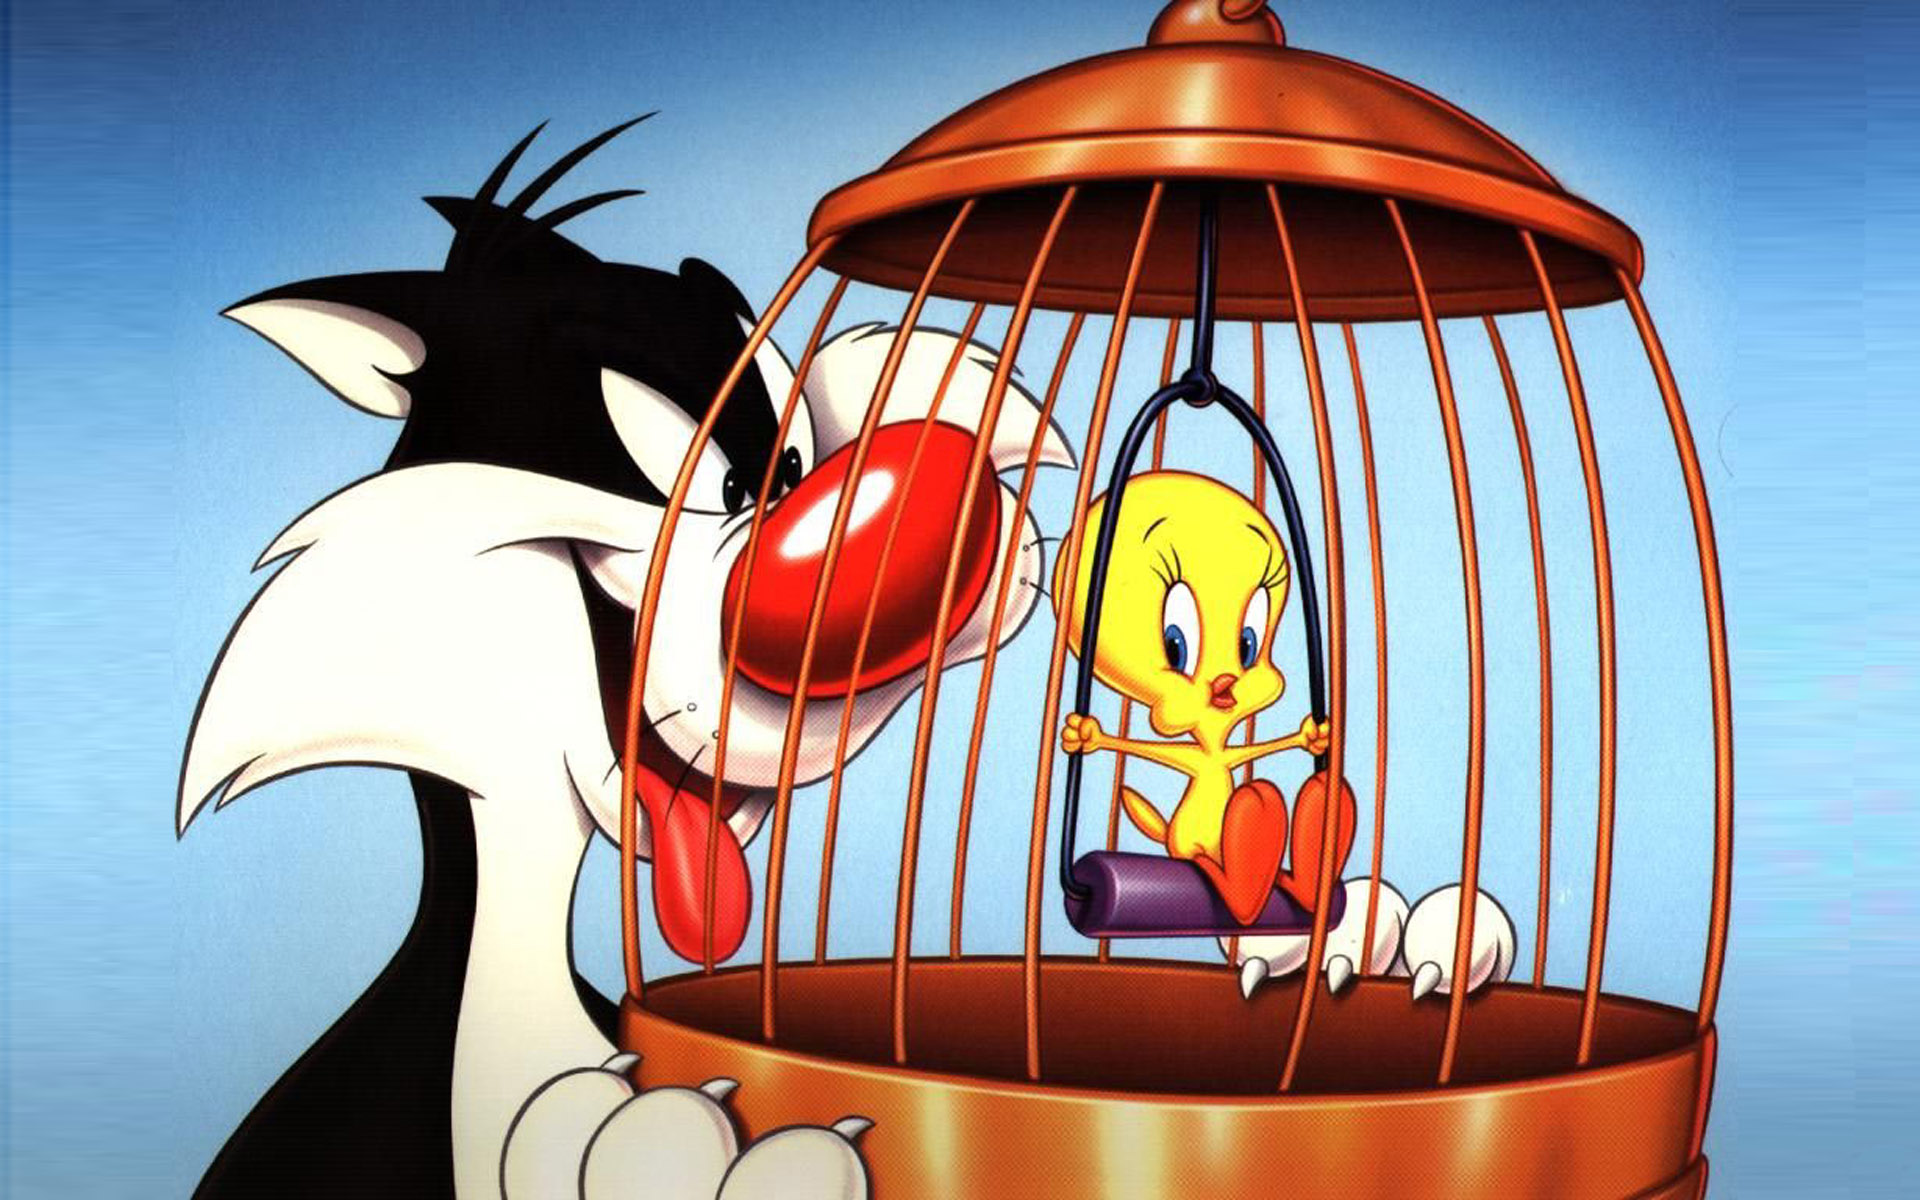 Cage Sylvester The Cat And Tweety Bird Cartoon Wallpaper Hd 1920x1200